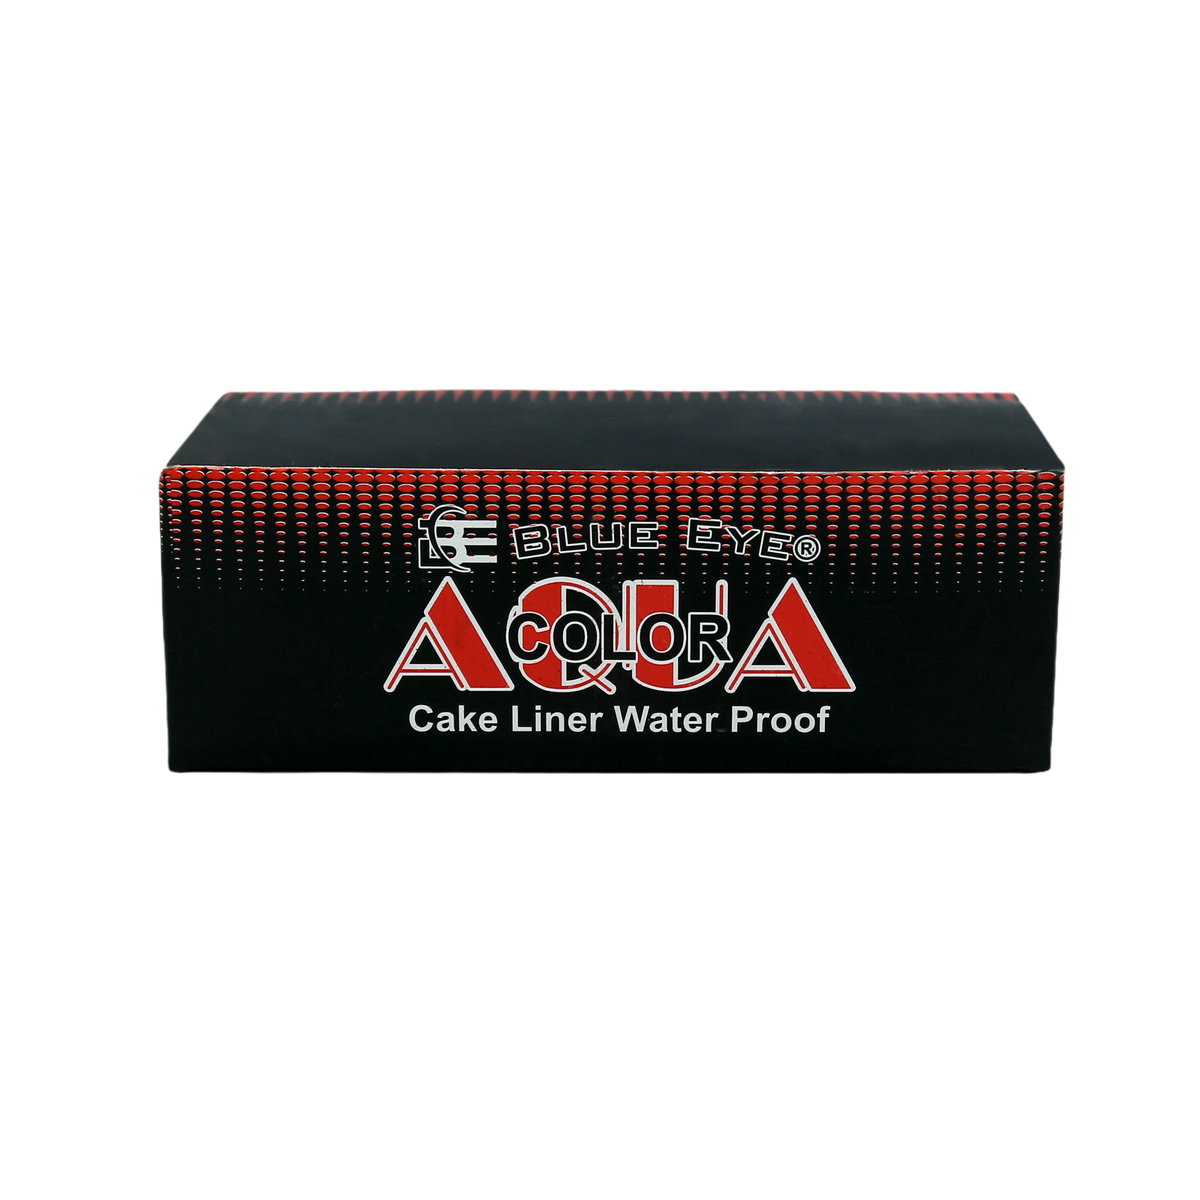 Aqua Color Cake Liner Water Proof White 18Gms freeshipping - lasertag.pk